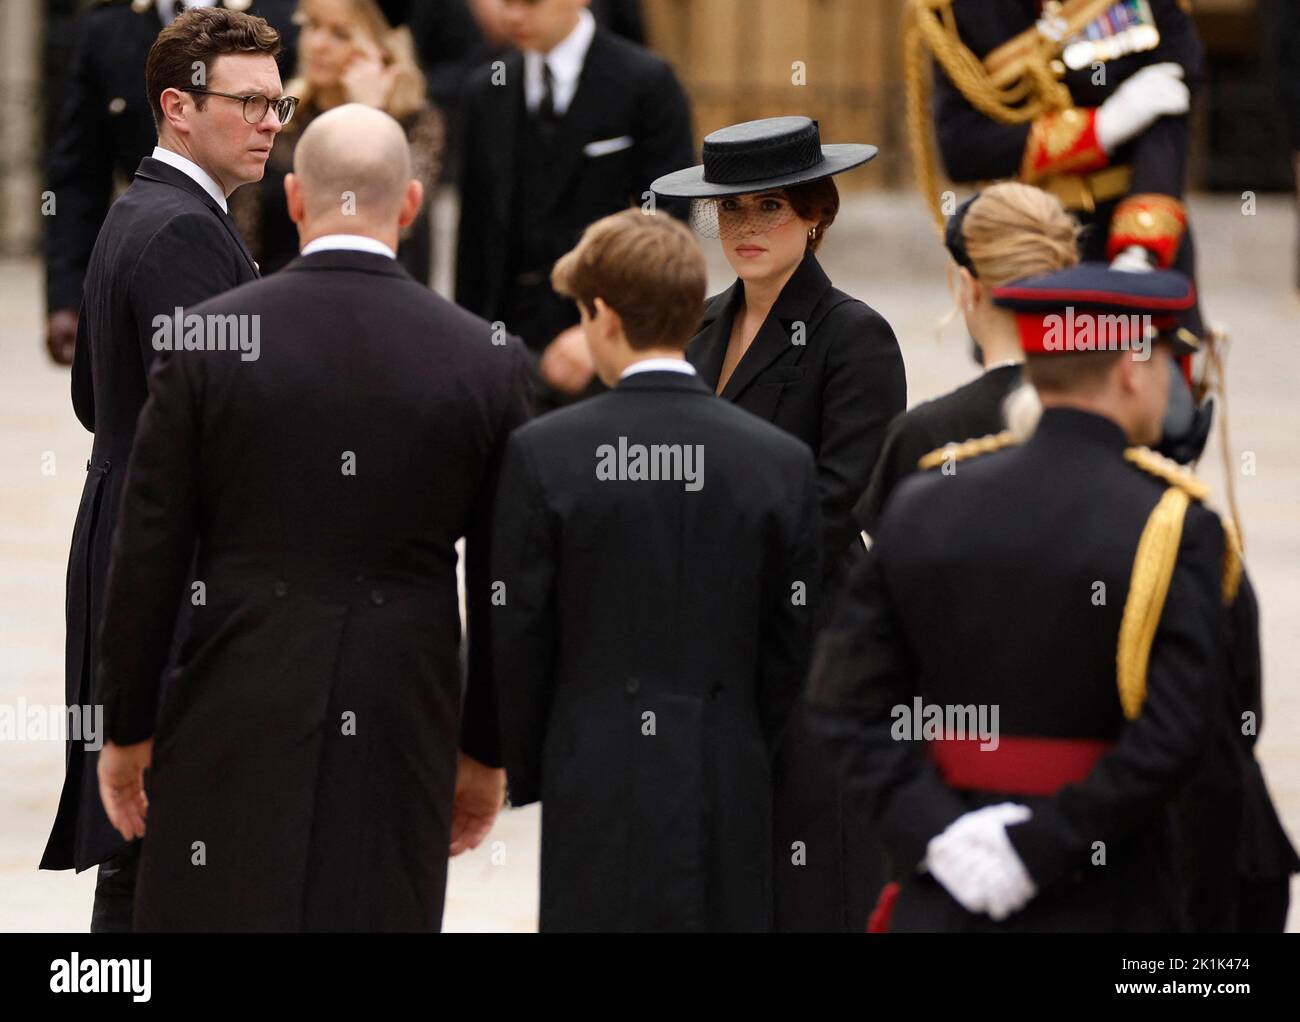 Britain's Princess Eugenie and Jack Brooksbank at Westminster Abbey on the day of state funeral and burial of Britain's Queen Elizabeth, in London, Britain, September 19, 2022 REUTERS/John Sibley Stock Photo